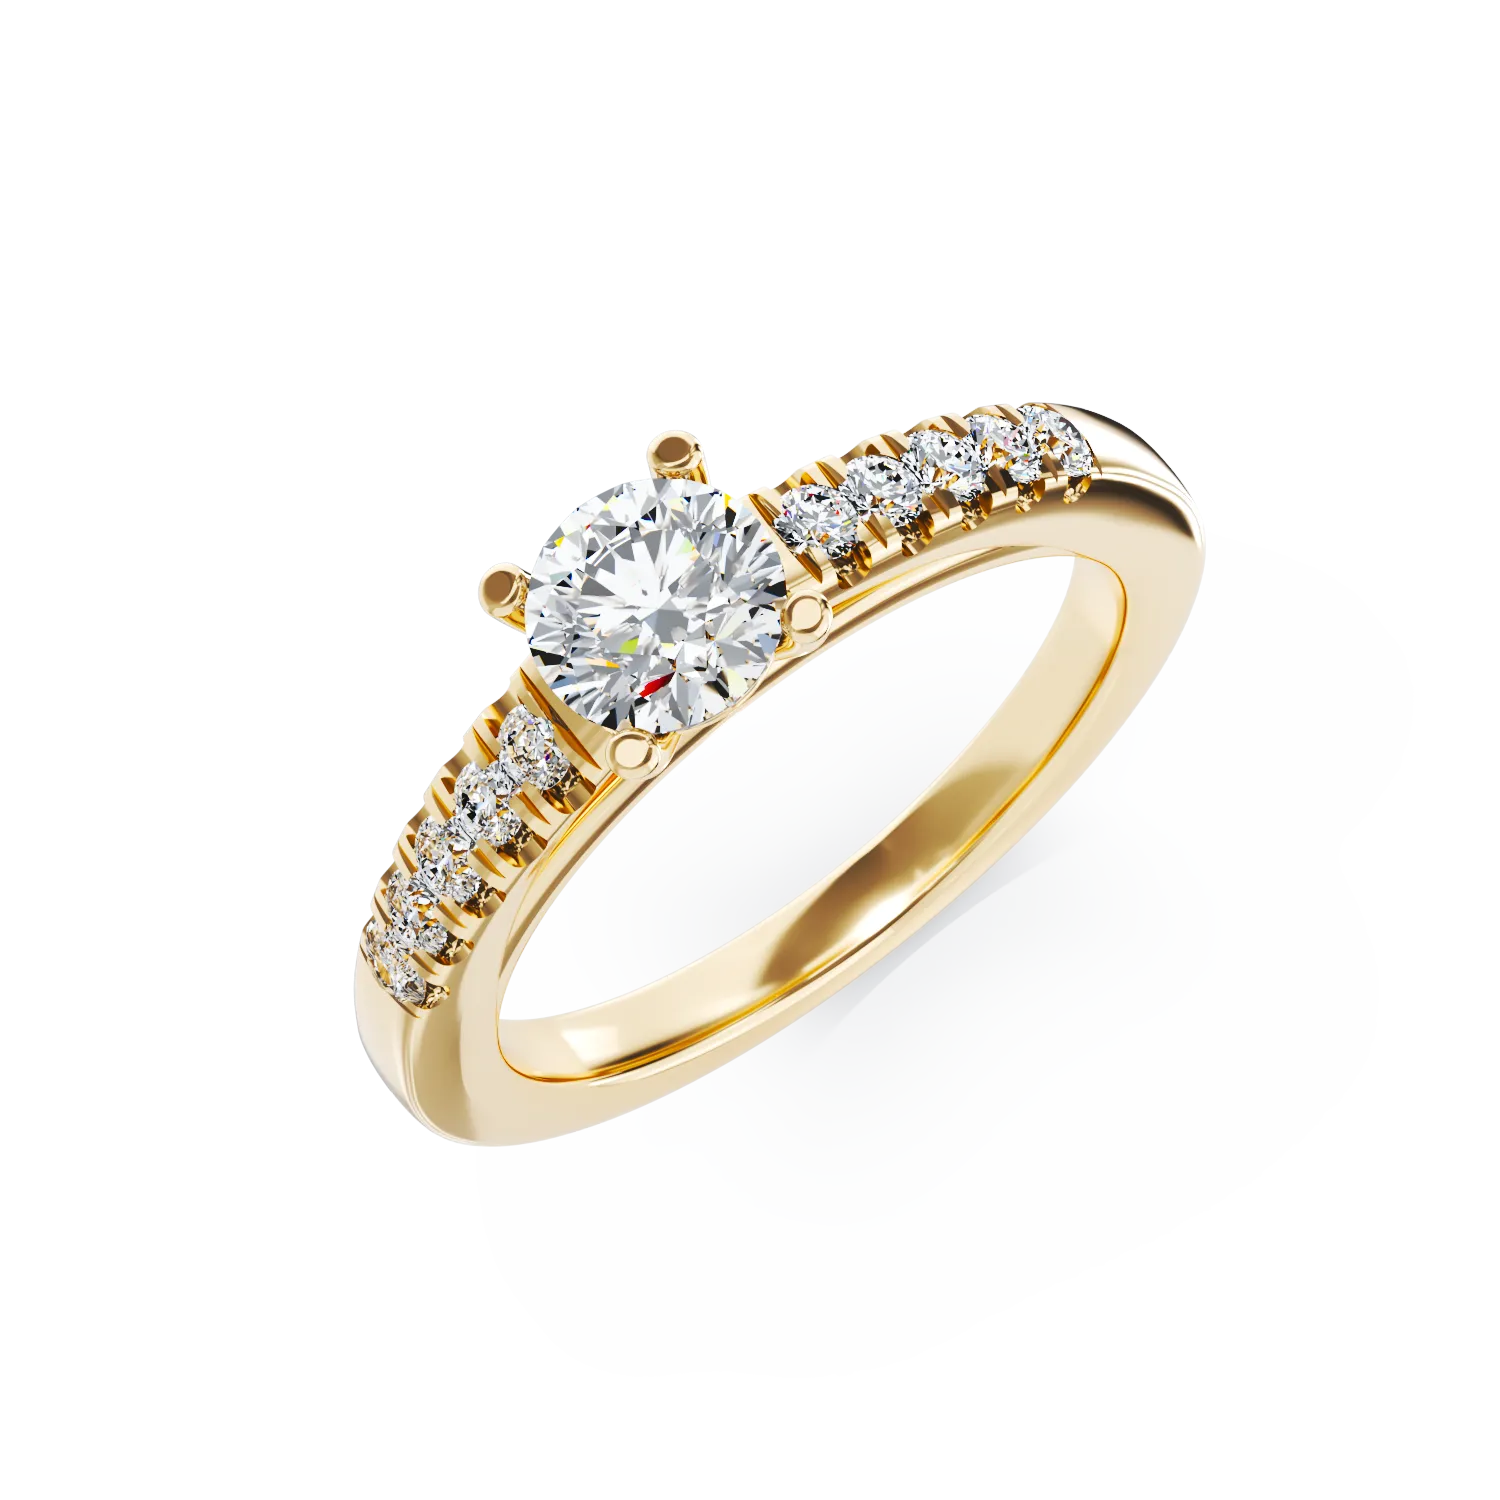 18K yellow gold engagement ring with 0.5ct diamond and 0.13ct diamonds